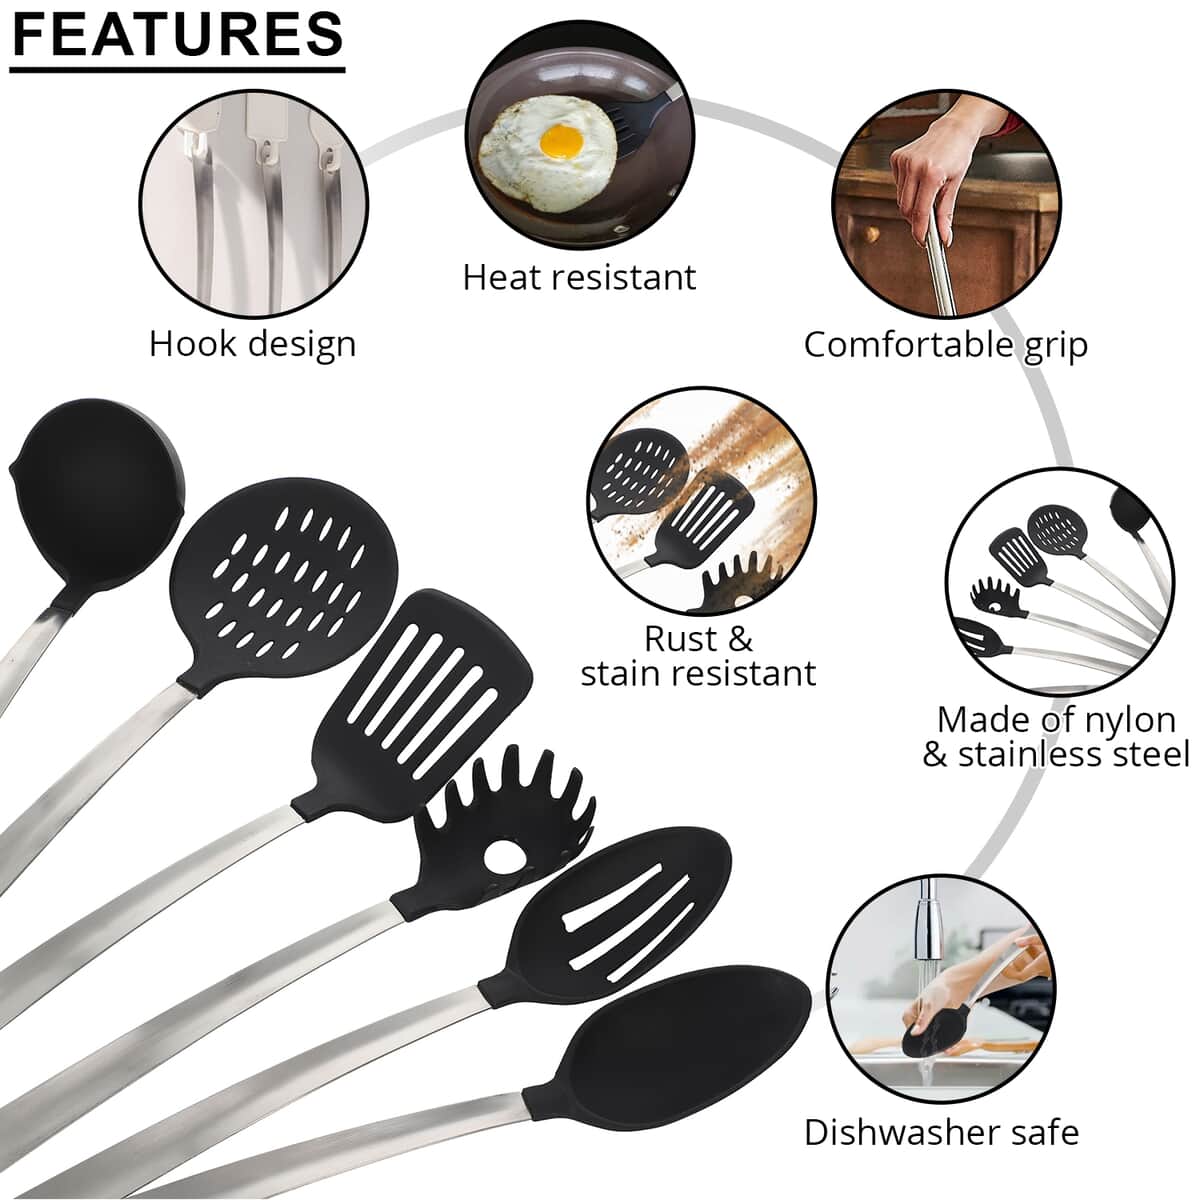 Set of 6 Stainless Steel with Nylon on The Top Laddle, Spaghetti Spoon, Slotted Turner, Slotted Spoon, Basting Spoon, Skimmer image number 2